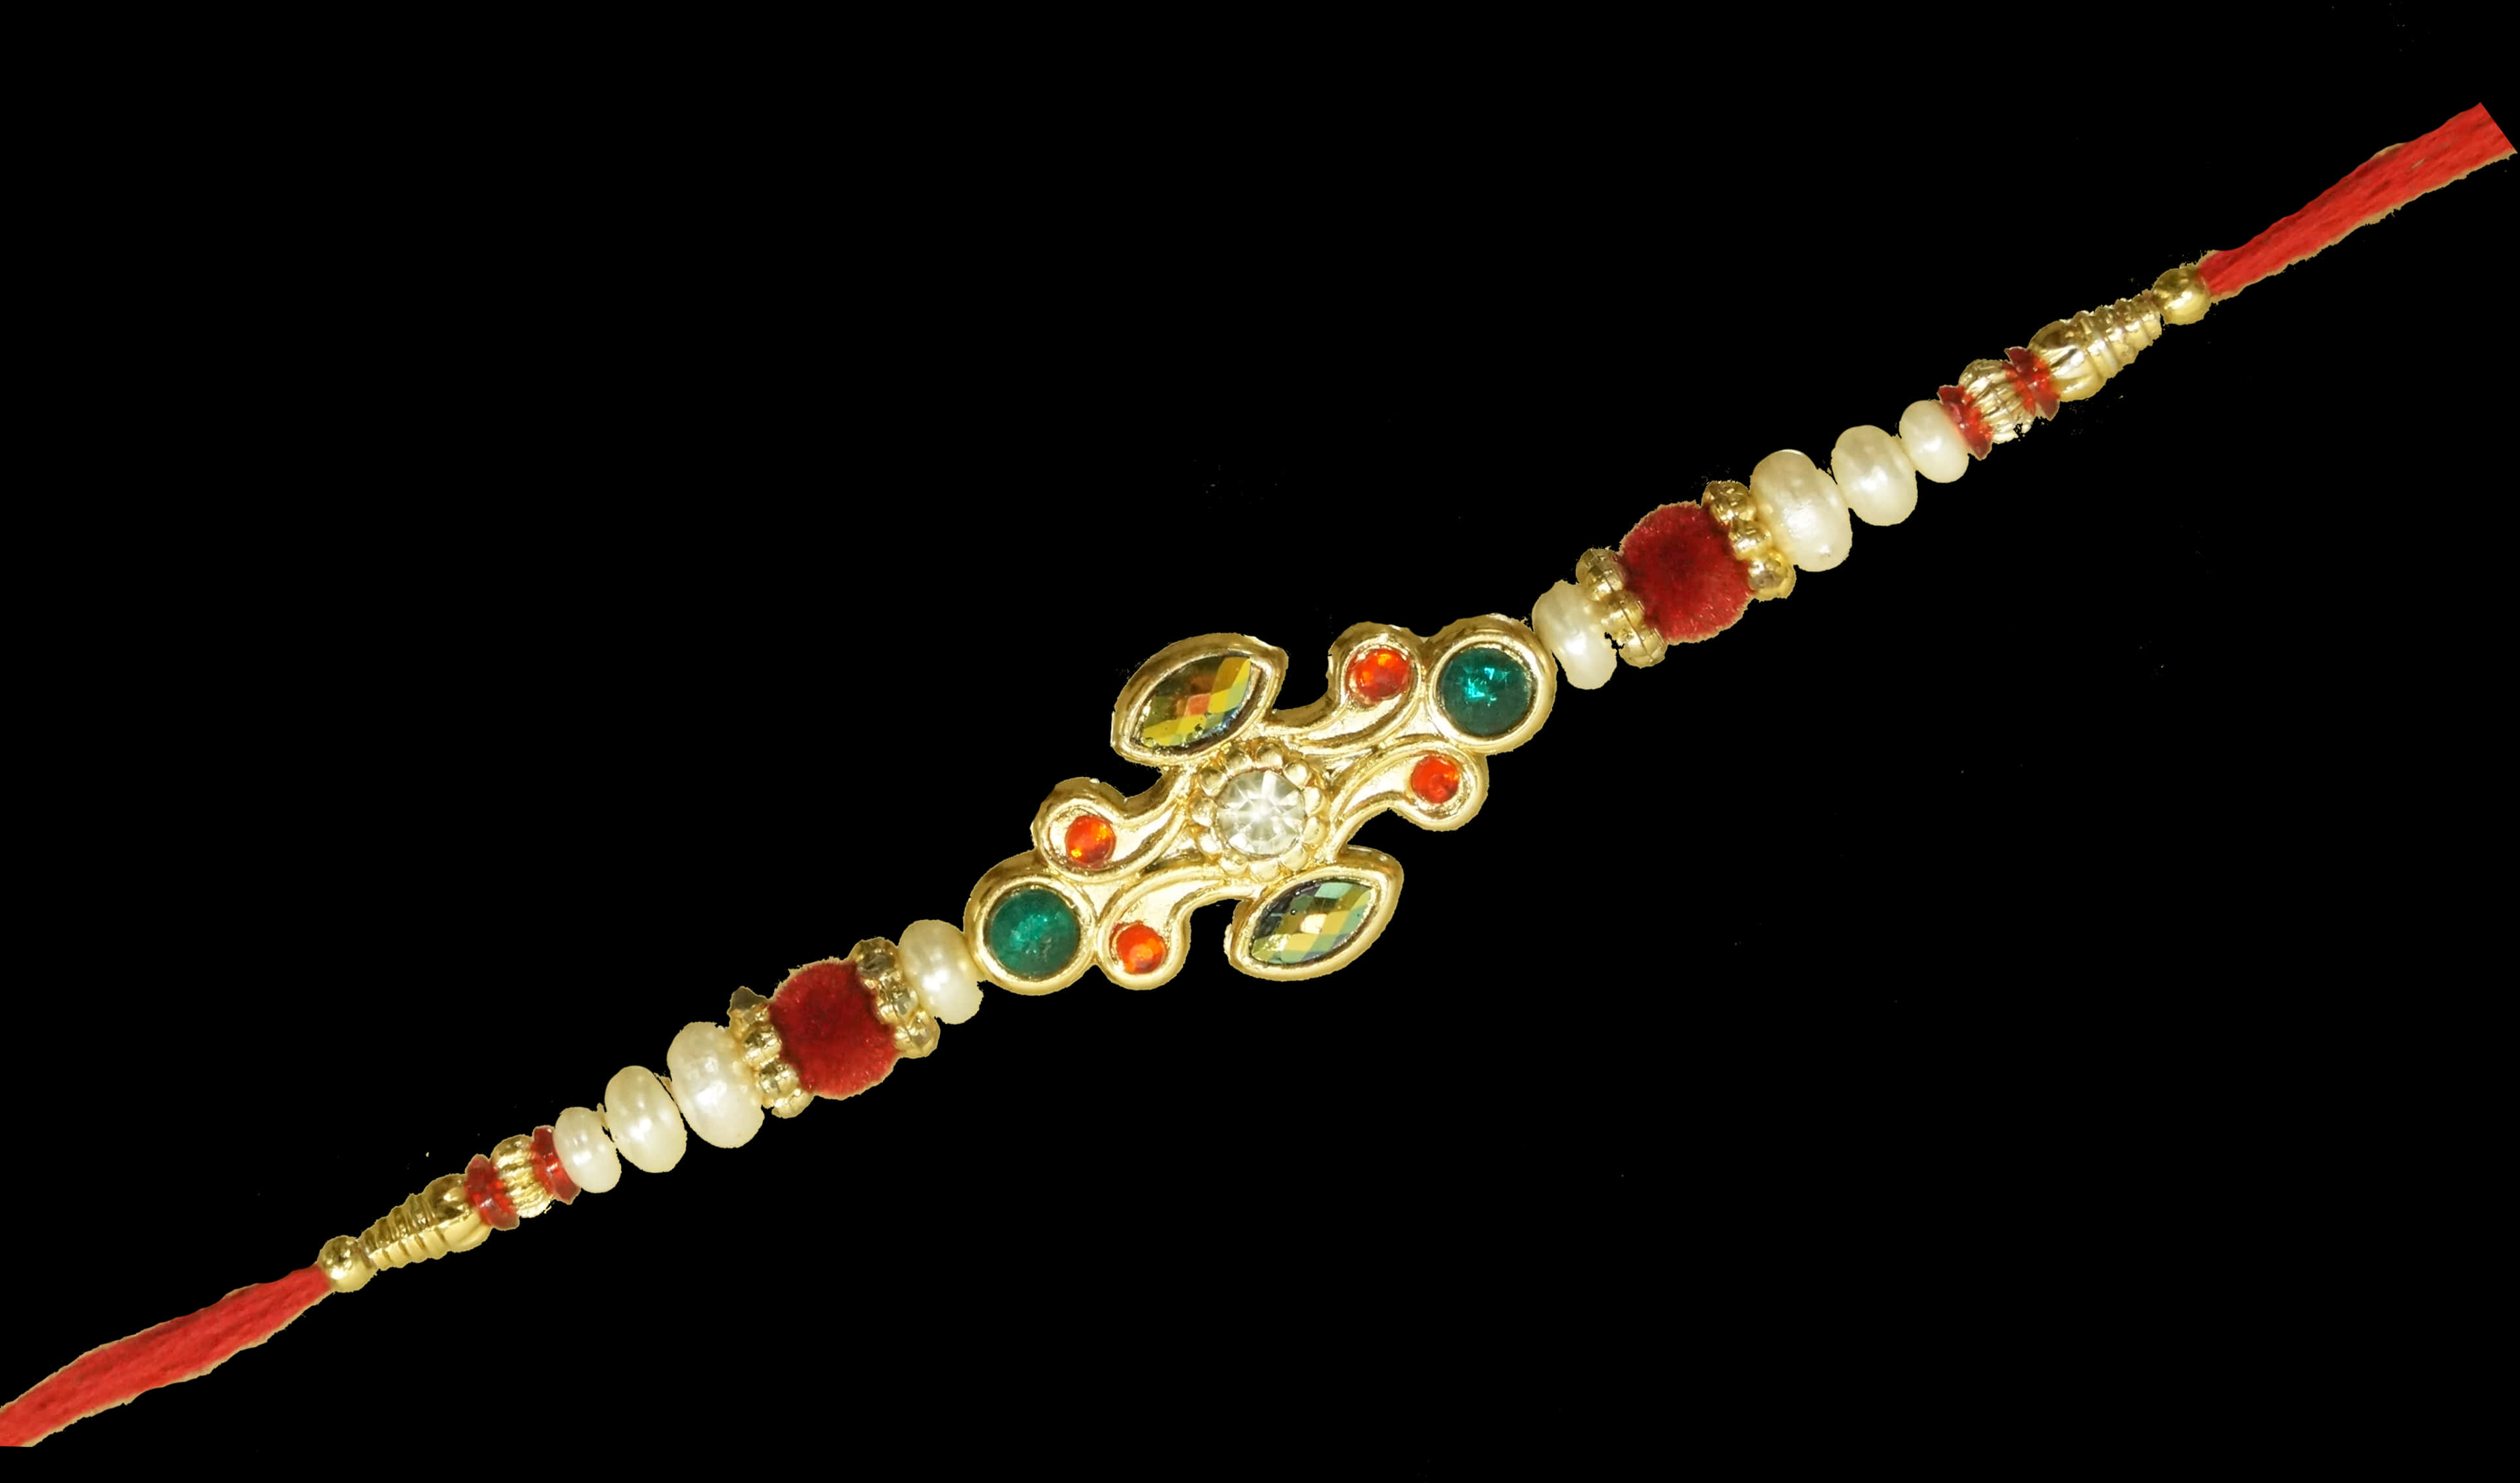 A Gold And Pearl Bracelet With Gems